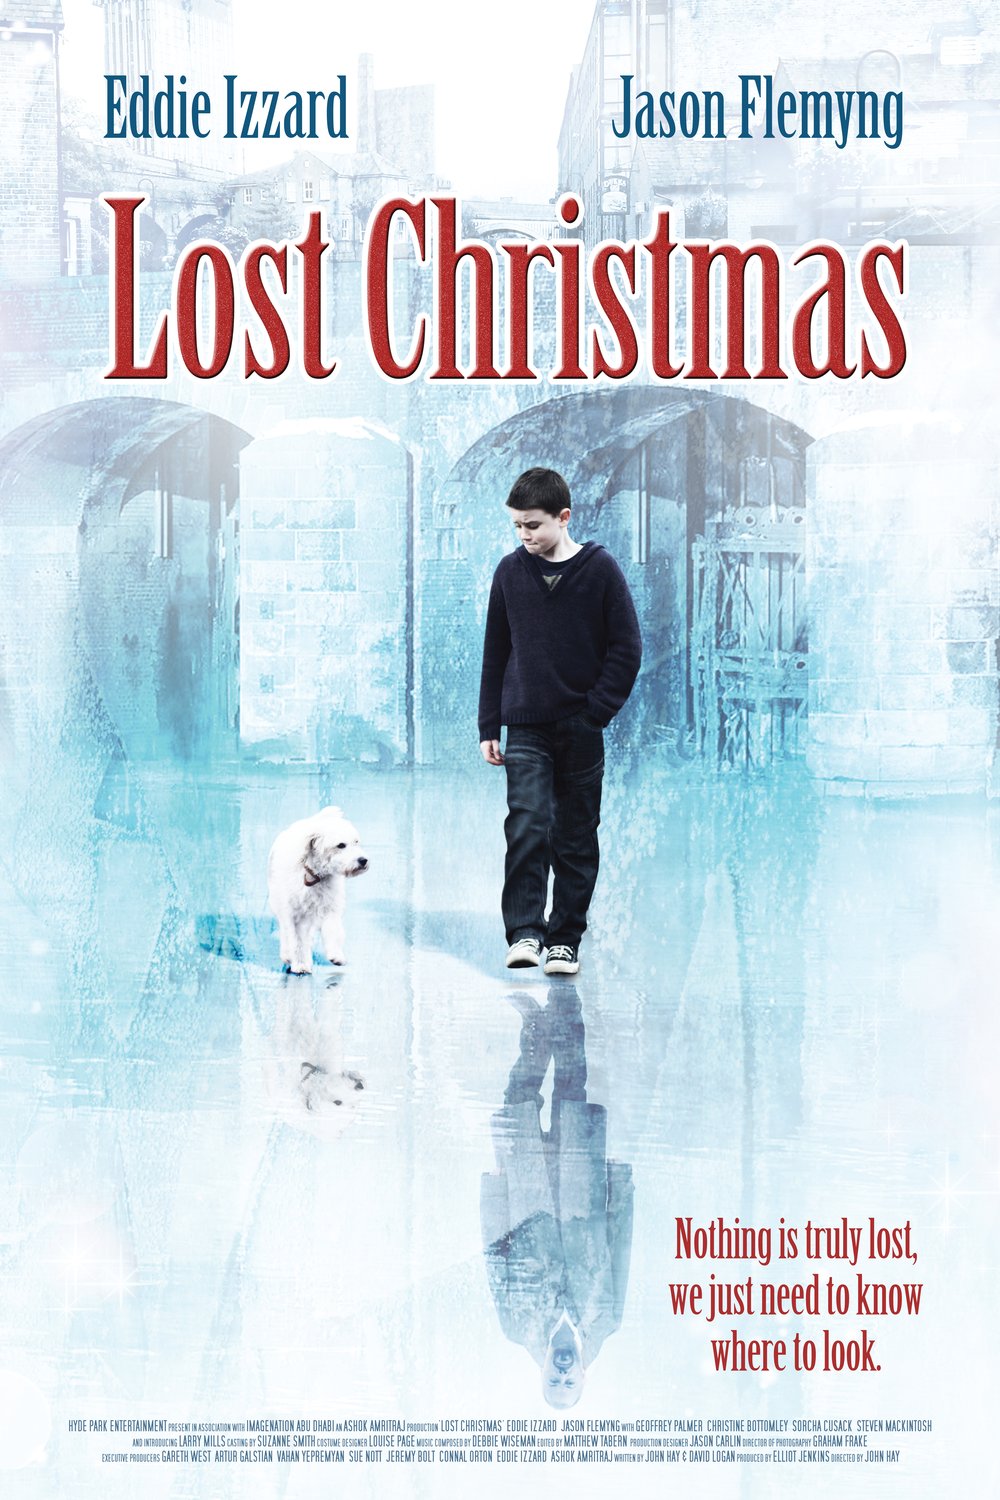 Poster of the movie Lost Christmas